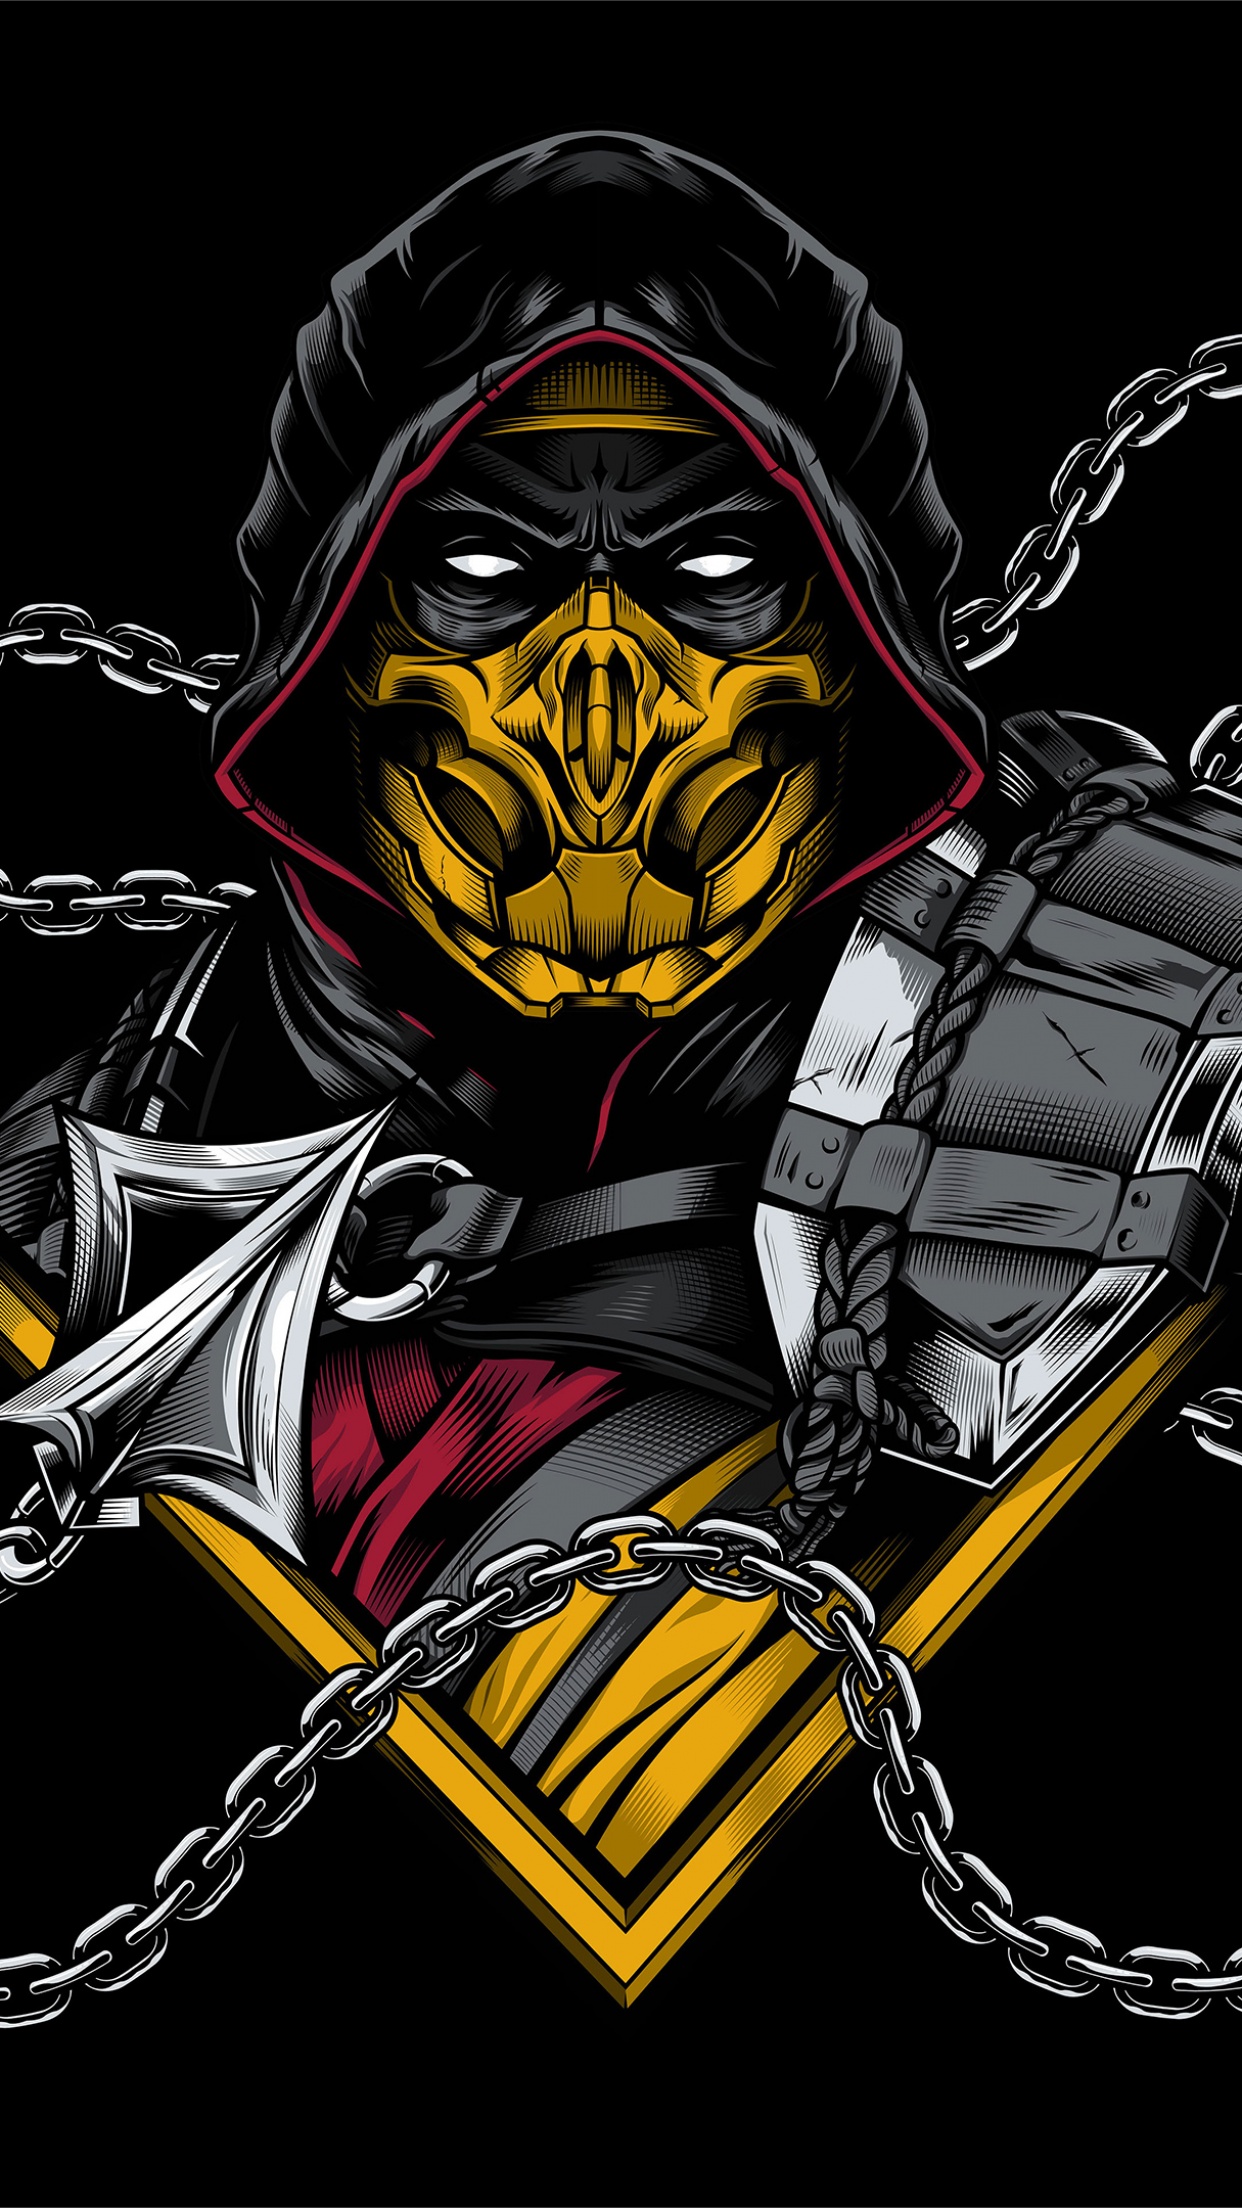 Scorpion Wallpapers and Backgrounds - WallpaperCG